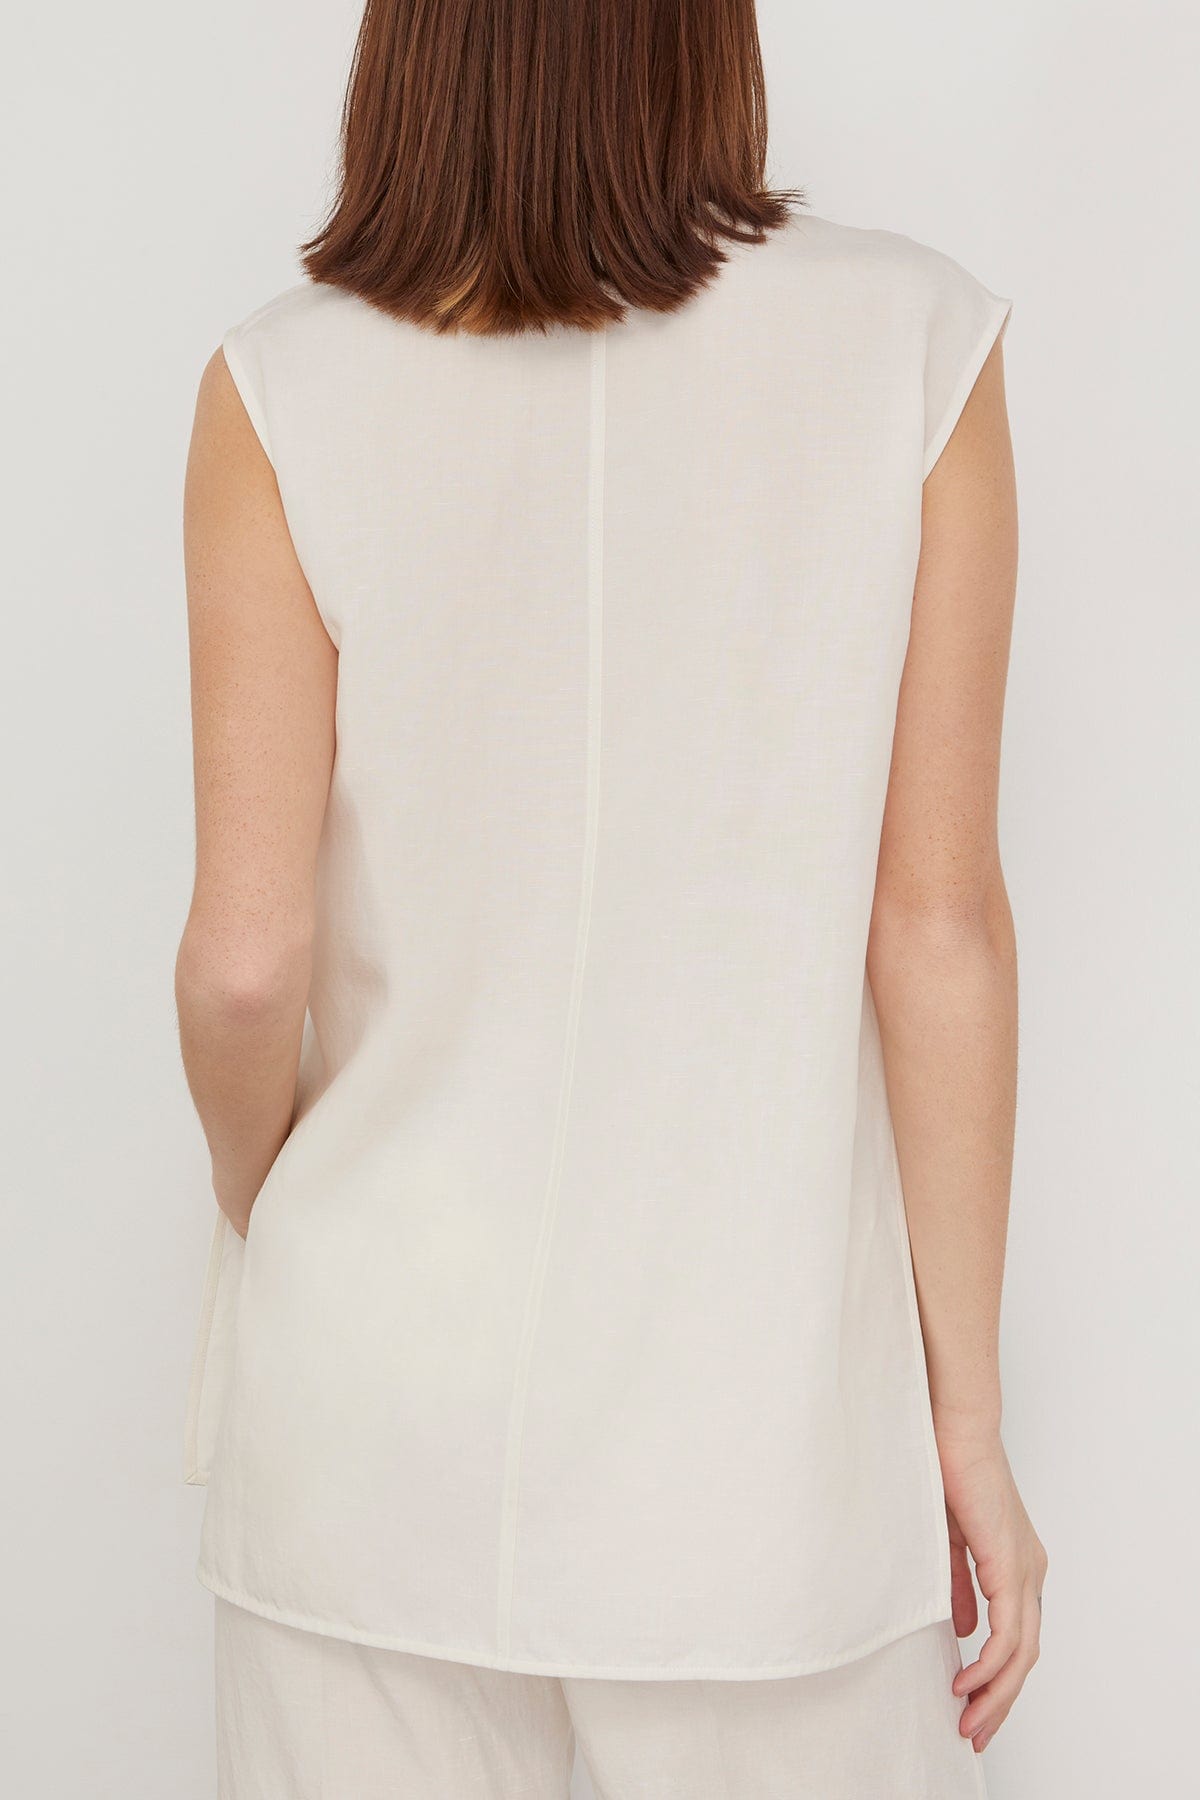 Toteme Tops Fluid V-Neck Top in Off White Toteme Fluid V-Neck Top in Off White